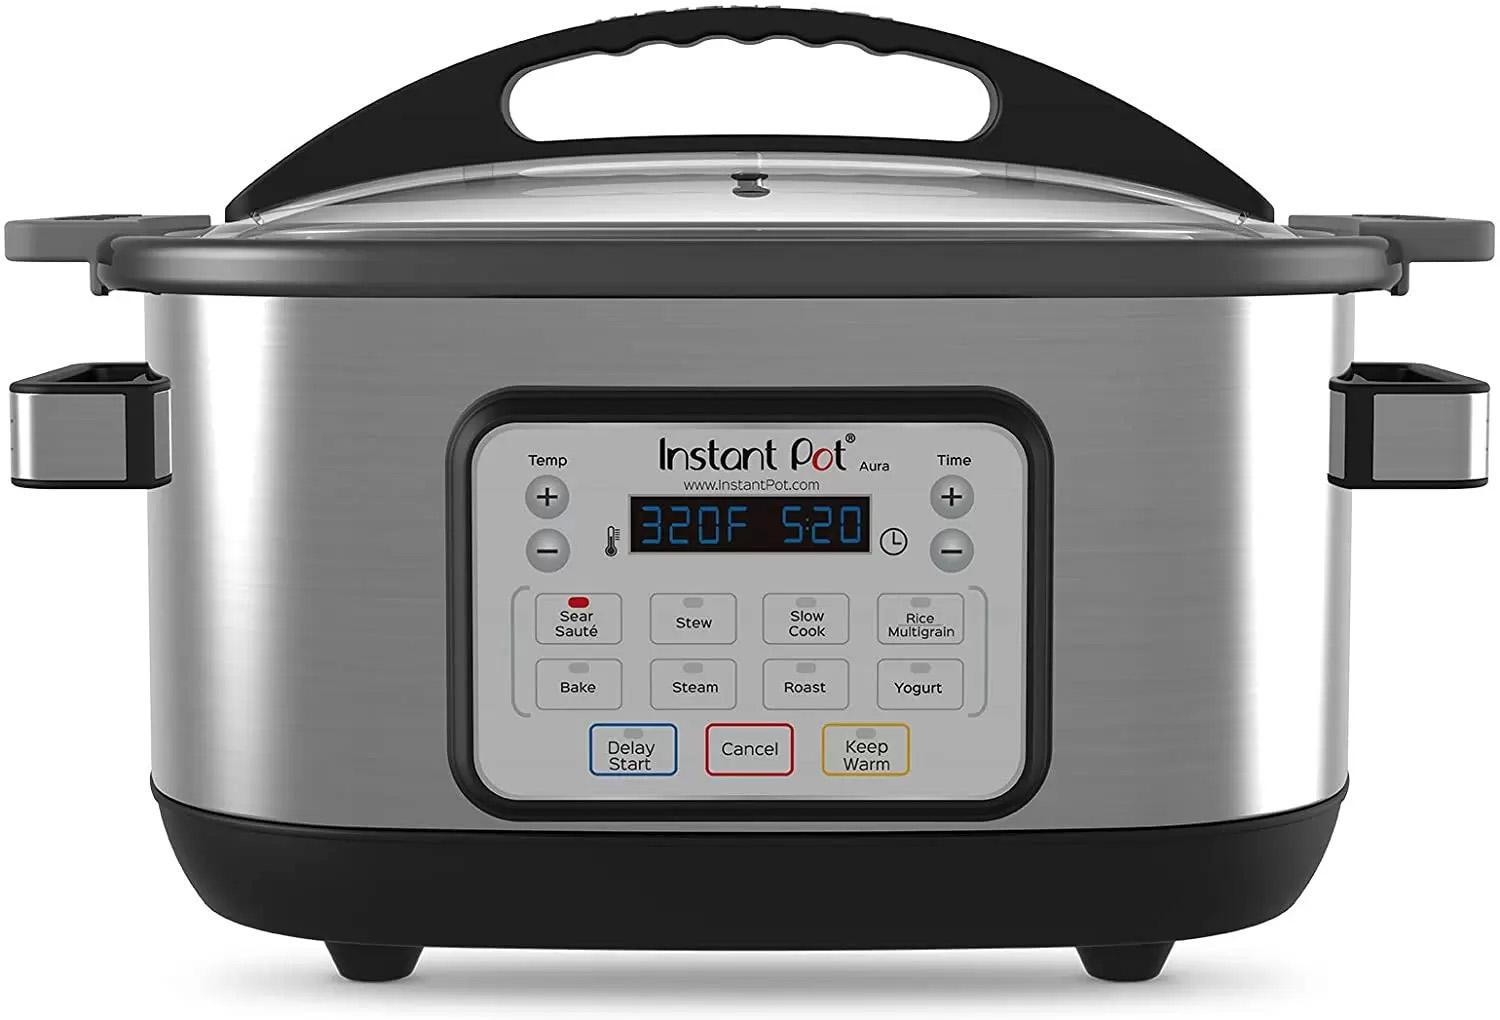 Instant Pot Aura Multi-Use Programmable Slow Cooker for $59.99 Shipped